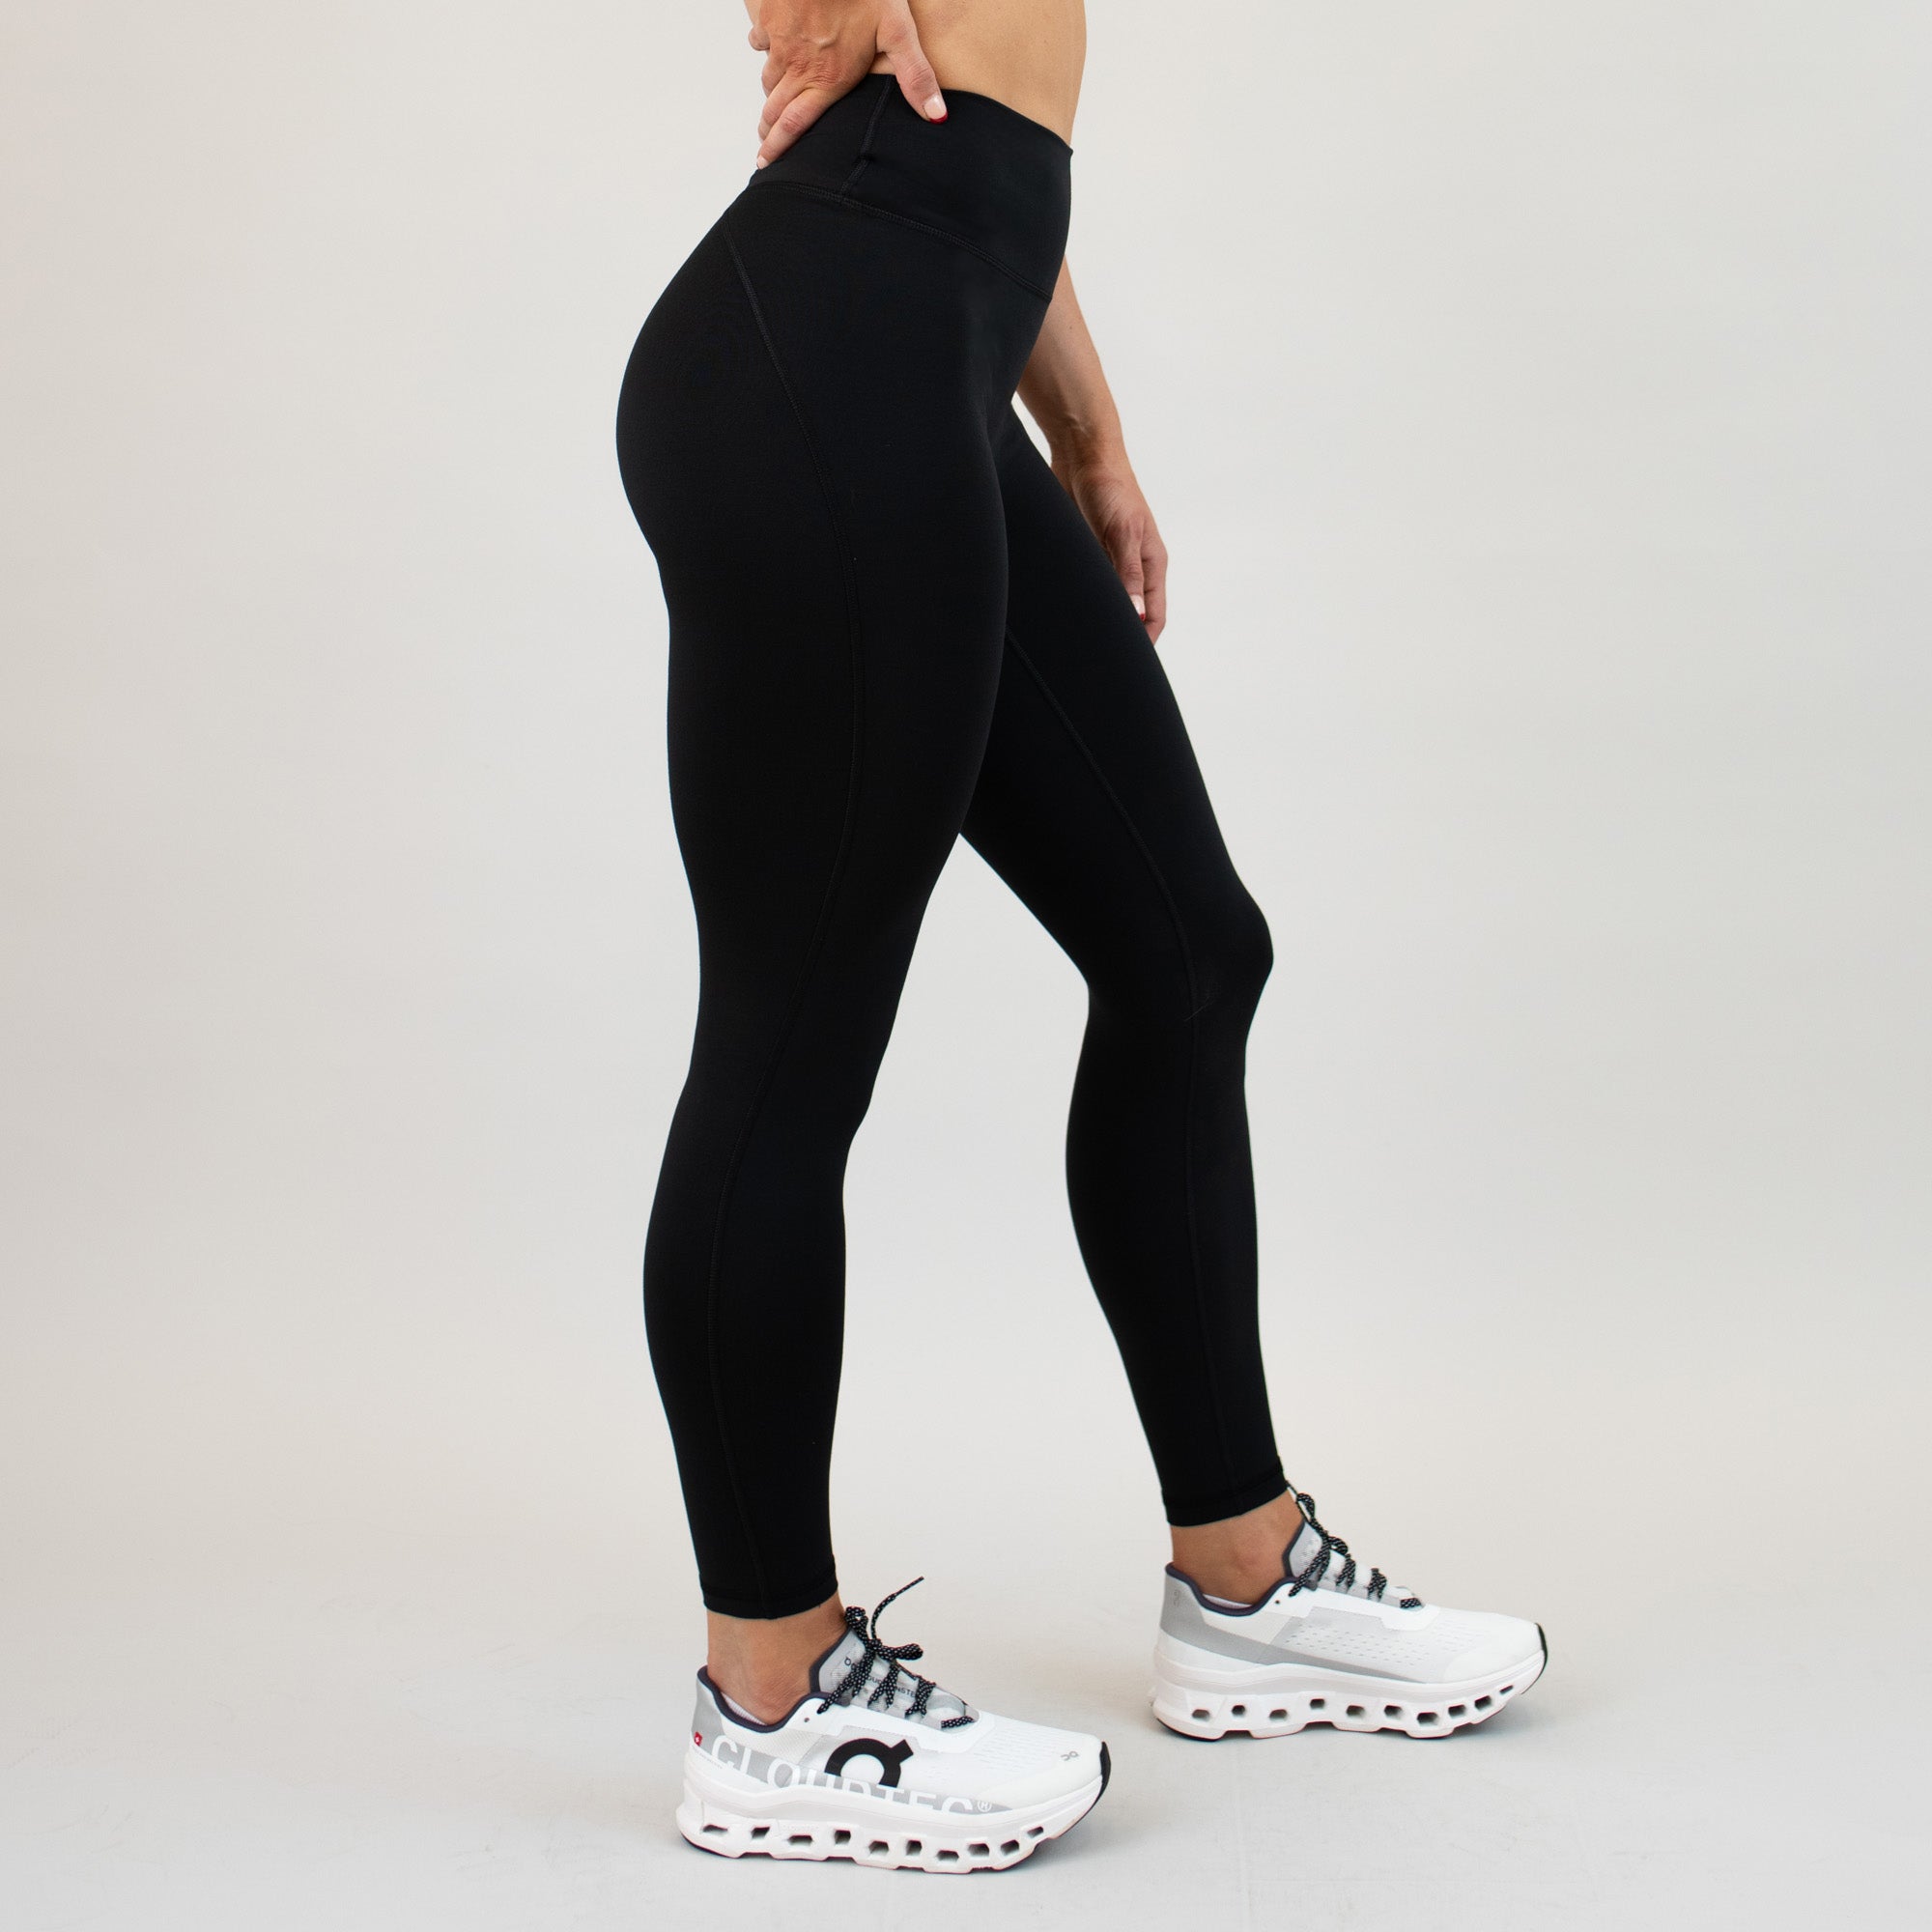 Charge Legging 25"- No Front Seam - Higher Rise